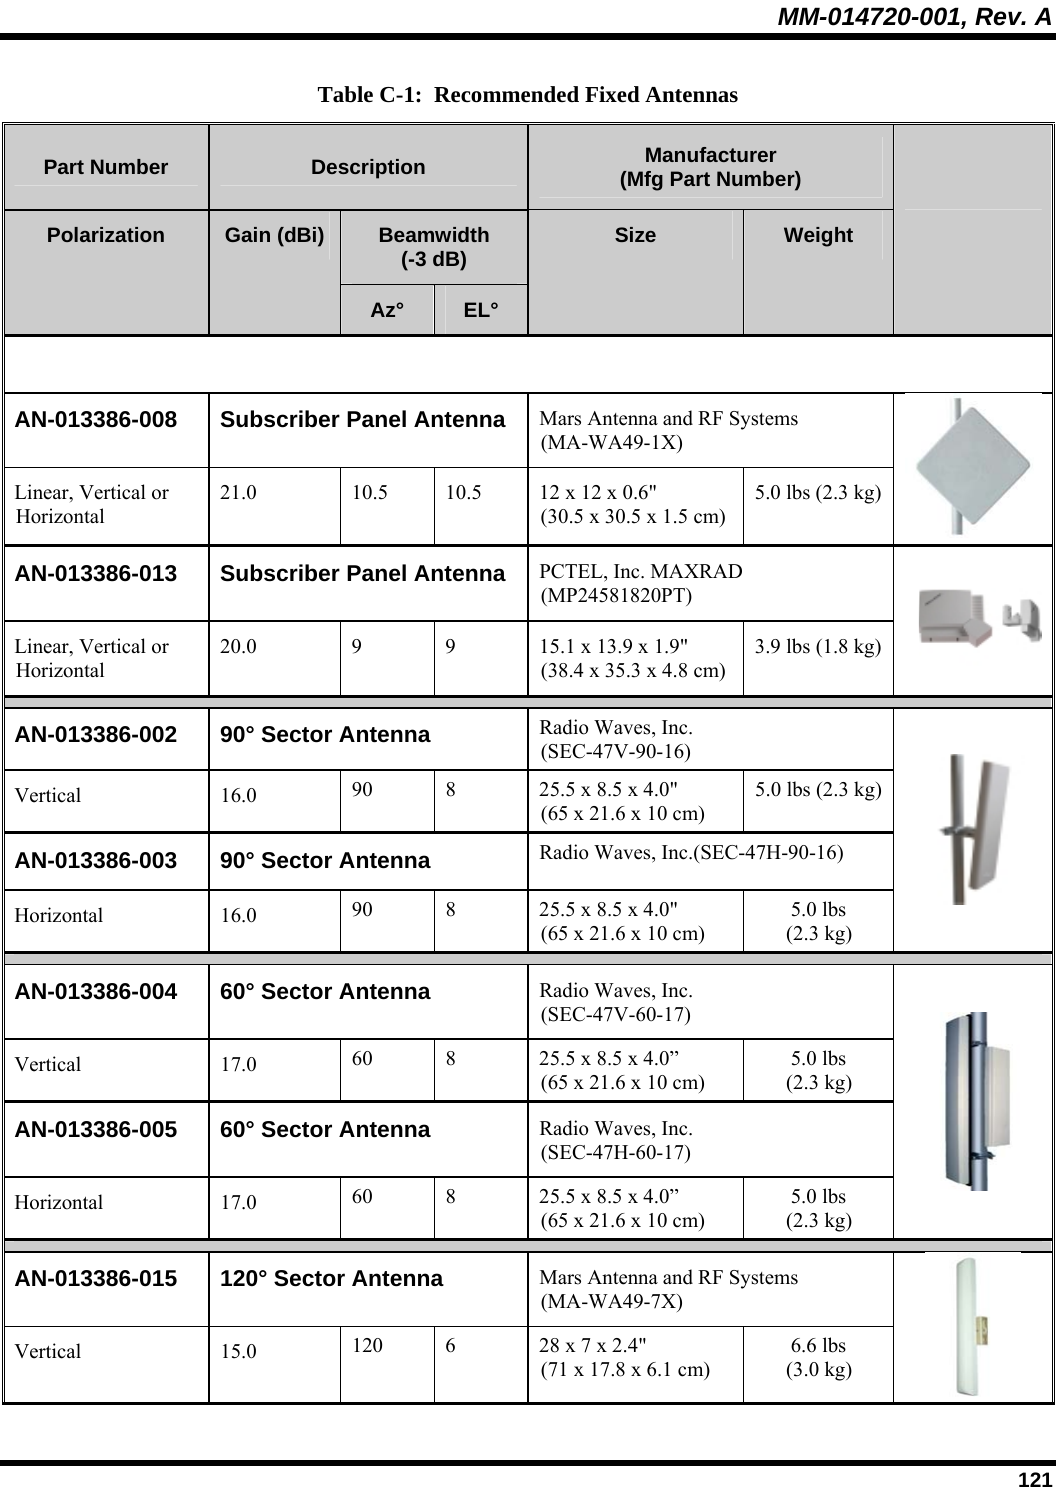 MM-014720-001, Rev. A  121 Table C-1:  Recommended Fixed Antennas Part Number  Description  Manufacturer (Mfg Part Number) Beamwidth (-3 dB) Polarization  Gain (dBi) Az°  EL° Size  Weight    AN-013386-008 Subscriber Panel Antenna Mars Antenna and RF Systems  (MA-WA49-1X) Linear, Vertical or Horizontal 21.0  10.5  10.5  12 x 12 x 0.6&quot;  (30.5 x 30.5 x 1.5 cm) 5.0 lbs (2.3 kg) AN-013386-013 Subscriber Panel Antenna PCTEL, Inc. MAXRAD (MP24581820PT) Linear, Vertical or Horizontal 20.0  9  9  15.1 x 13.9 x 1.9&quot;   (38.4 x 35.3 x 4.8 cm) 3.9 lbs (1.8 kg)  AN-013386-002 90° Sector Antenna  Radio Waves, Inc. (SEC-47V-90-16) Vertical 16.0 90  8  25.5 x 8.5 x 4.0&quot;  (65 x 21.6 x 10 cm) 5.0 lbs (2.3 kg) AN-013386-003 90° Sector Antenna  Radio Waves, Inc.(SEC-47H-90-16) Horizontal 16.0 90  8  25.5 x 8.5 x 4.0&quot;  (65 x 21.6 x 10 cm) 5.0 lbs (2.3 kg)  AN-013386-004 60° Sector Antenna  Radio Waves, Inc. (SEC-47V-60-17) Vertical 17.0 60  8  25.5 x 8.5 x 4.0”  (65 x 21.6 x 10 cm) 5.0 lbs (2.3 kg) AN-013386-005 60° Sector Antenna  Radio Waves, Inc. (SEC-47H-60-17) Horizontal 17.0 60  8  25.5 x 8.5 x 4.0”  (65 x 21.6 x 10 cm) 5.0 lbs (2.3 kg)   AN-013386-015  120° Sector Antenna  Mars Antenna and RF Systems (MA-WA49-7X) Vertical 15.0 120  6  28 x 7 x 2.4&quot;  (71 x 17.8 x 6.1 cm) 6.6 lbs (3.0 kg)  